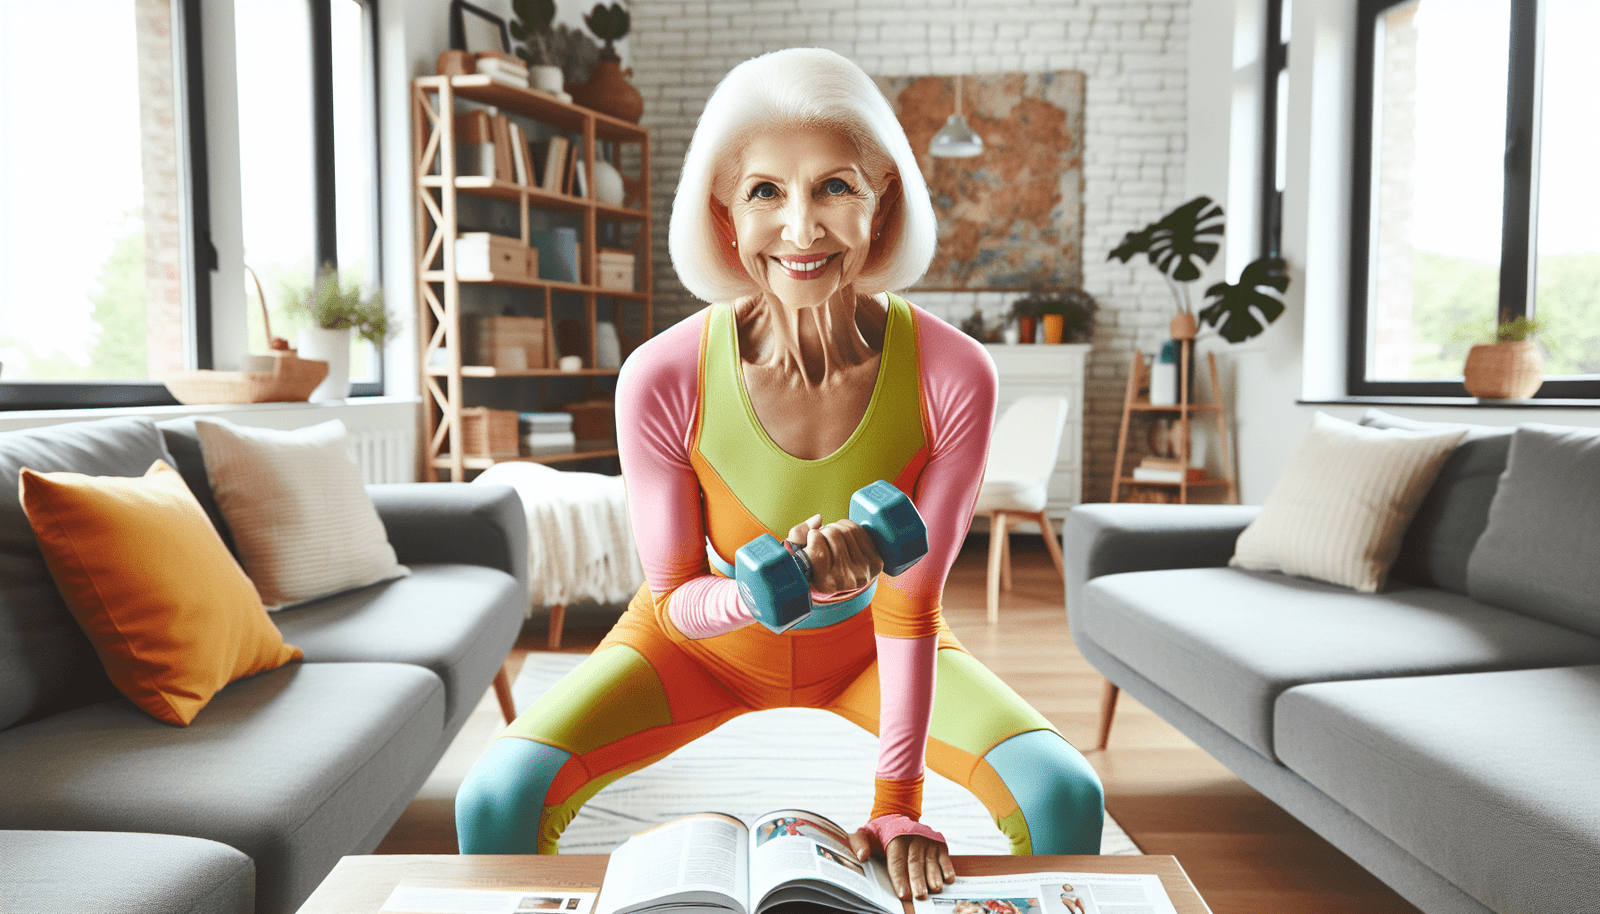 FAQs on How to Build Muscle Mass for Women Over 60